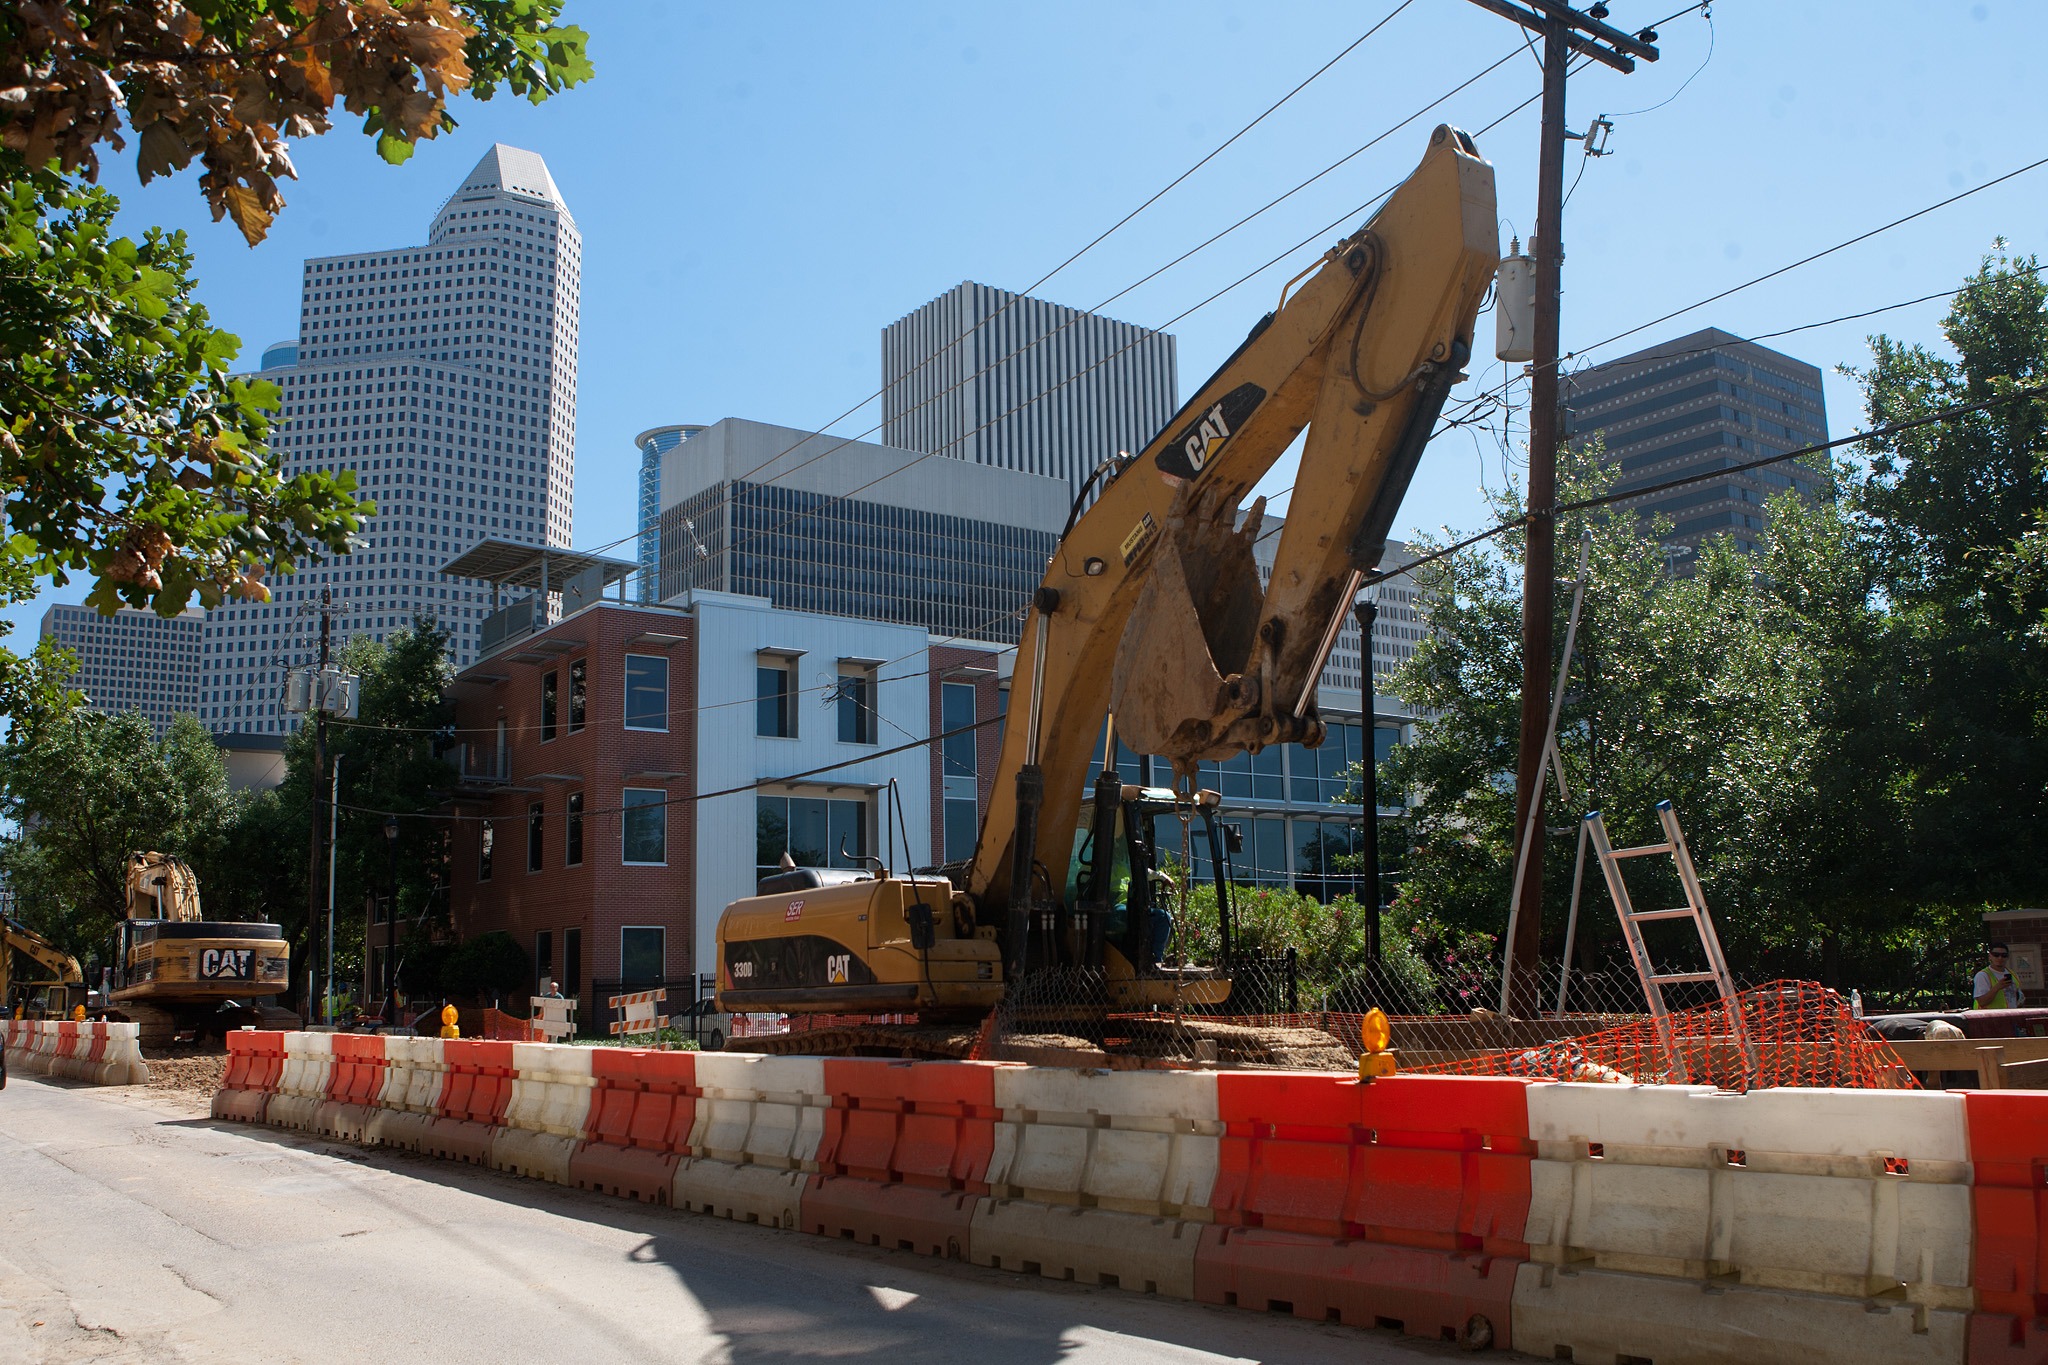 Road project slows traffic on Bagby segment - Houston Chronicle2048 x 1365